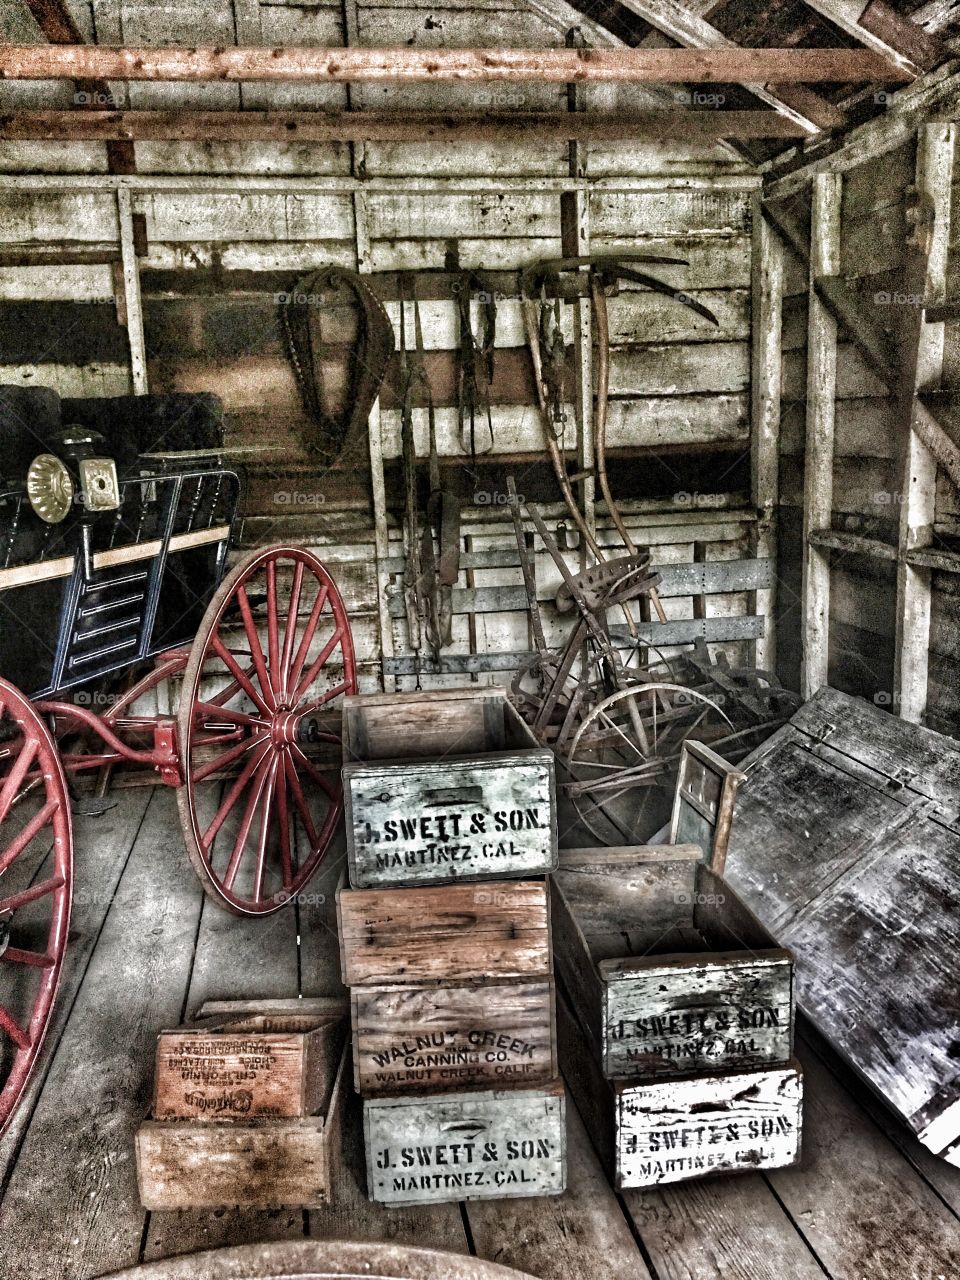 Old carriage house on John Muir historic site with old carriage, wooden boxes, bicycles and tools. 